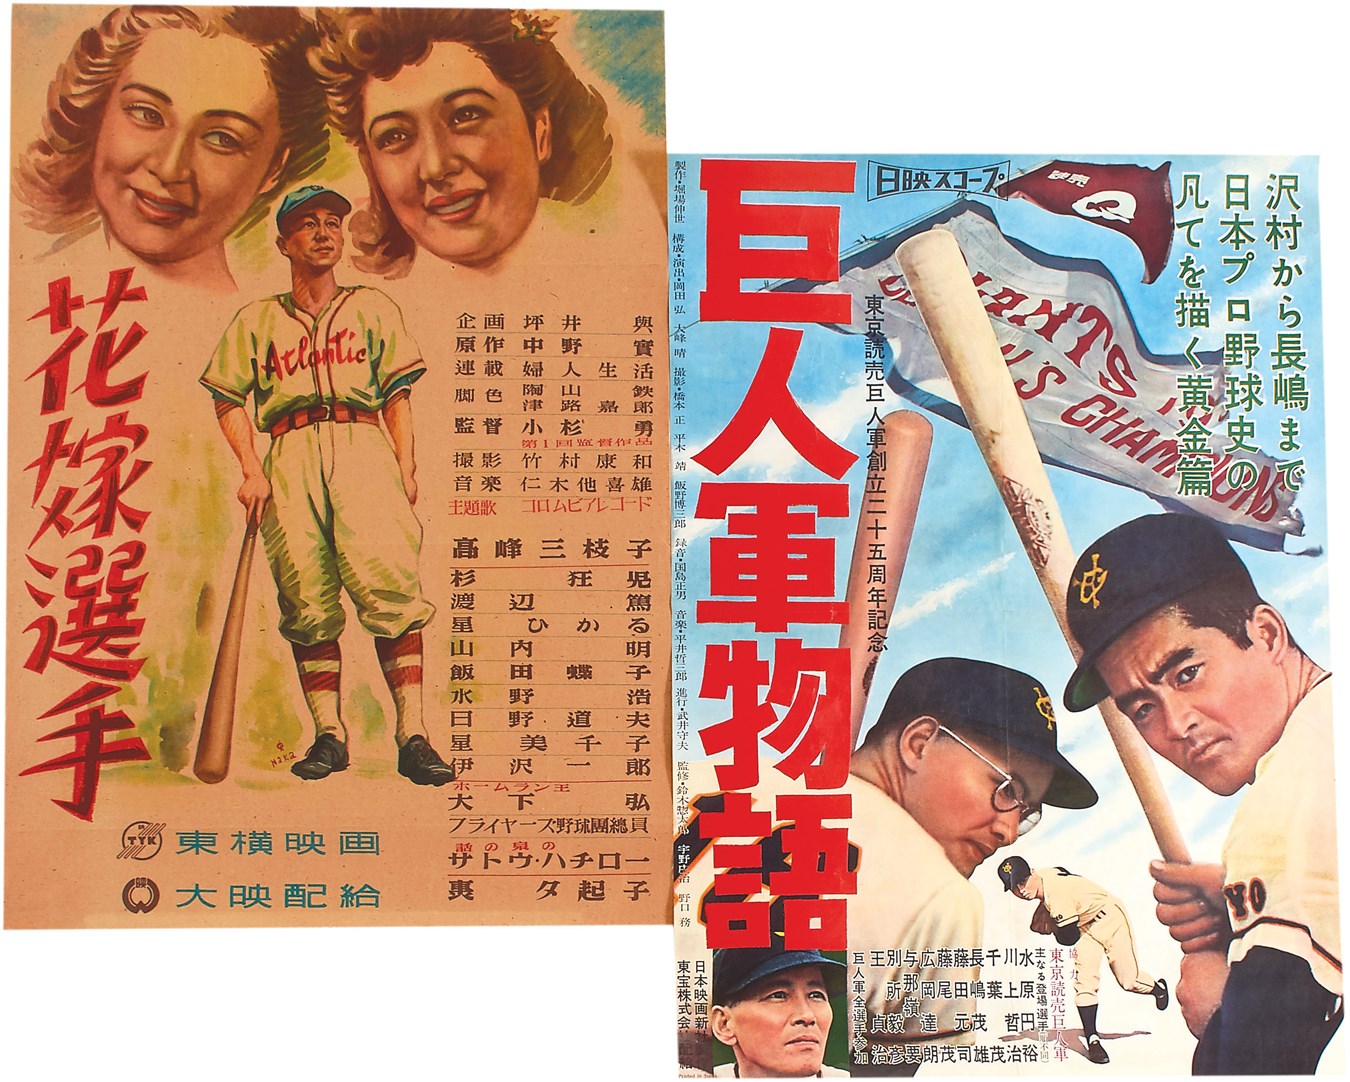 - Two 1940s-50s Japanese Baseball Movie Posters w/"The Yomiuri Giants Story" starring Oh & Nagashima